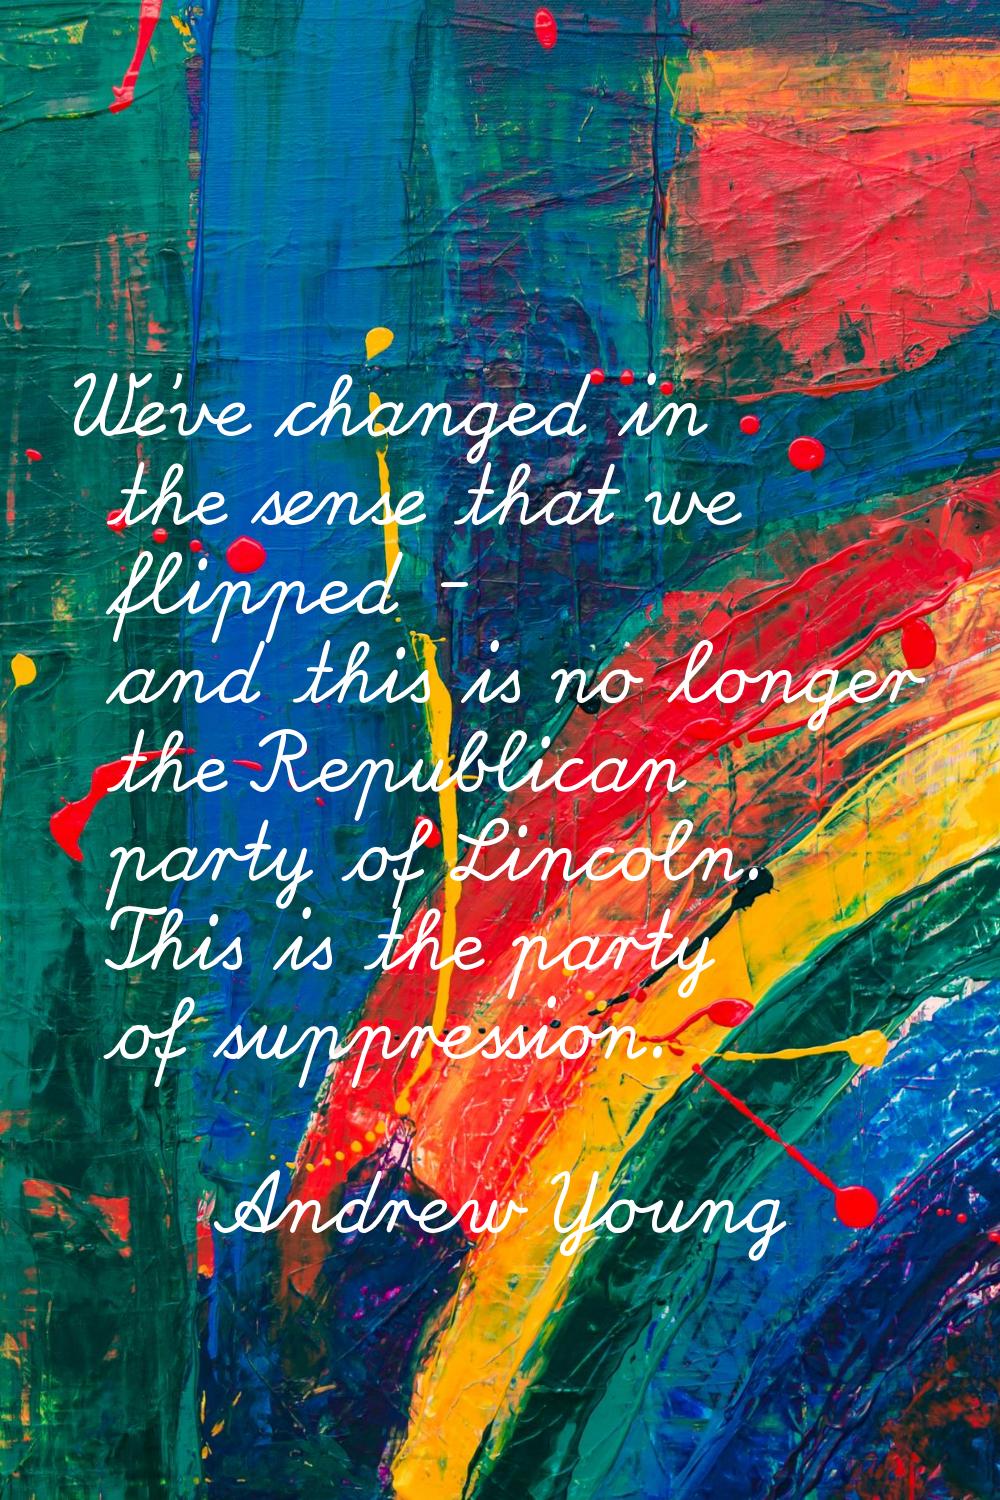 We've changed in the sense that we flipped - and this is no longer the Republican party of Lincoln.